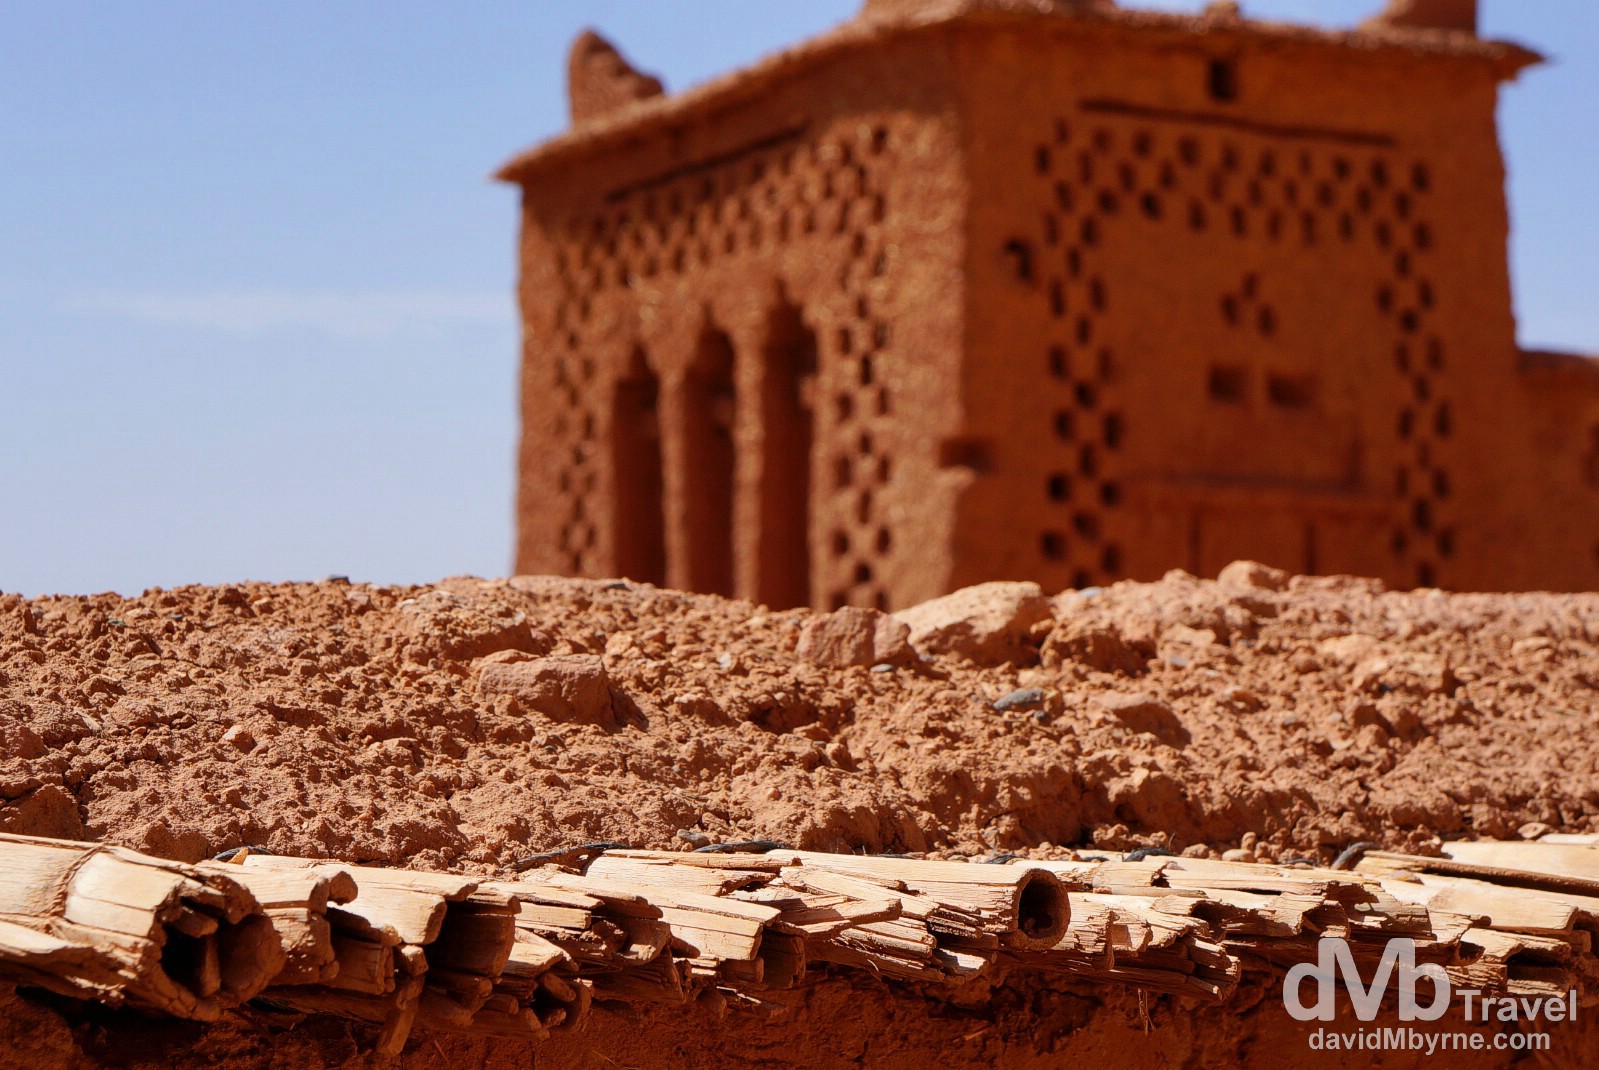 A section of the walls of the Ait Benhaddou, southern Morocco. May 14th, 2014.